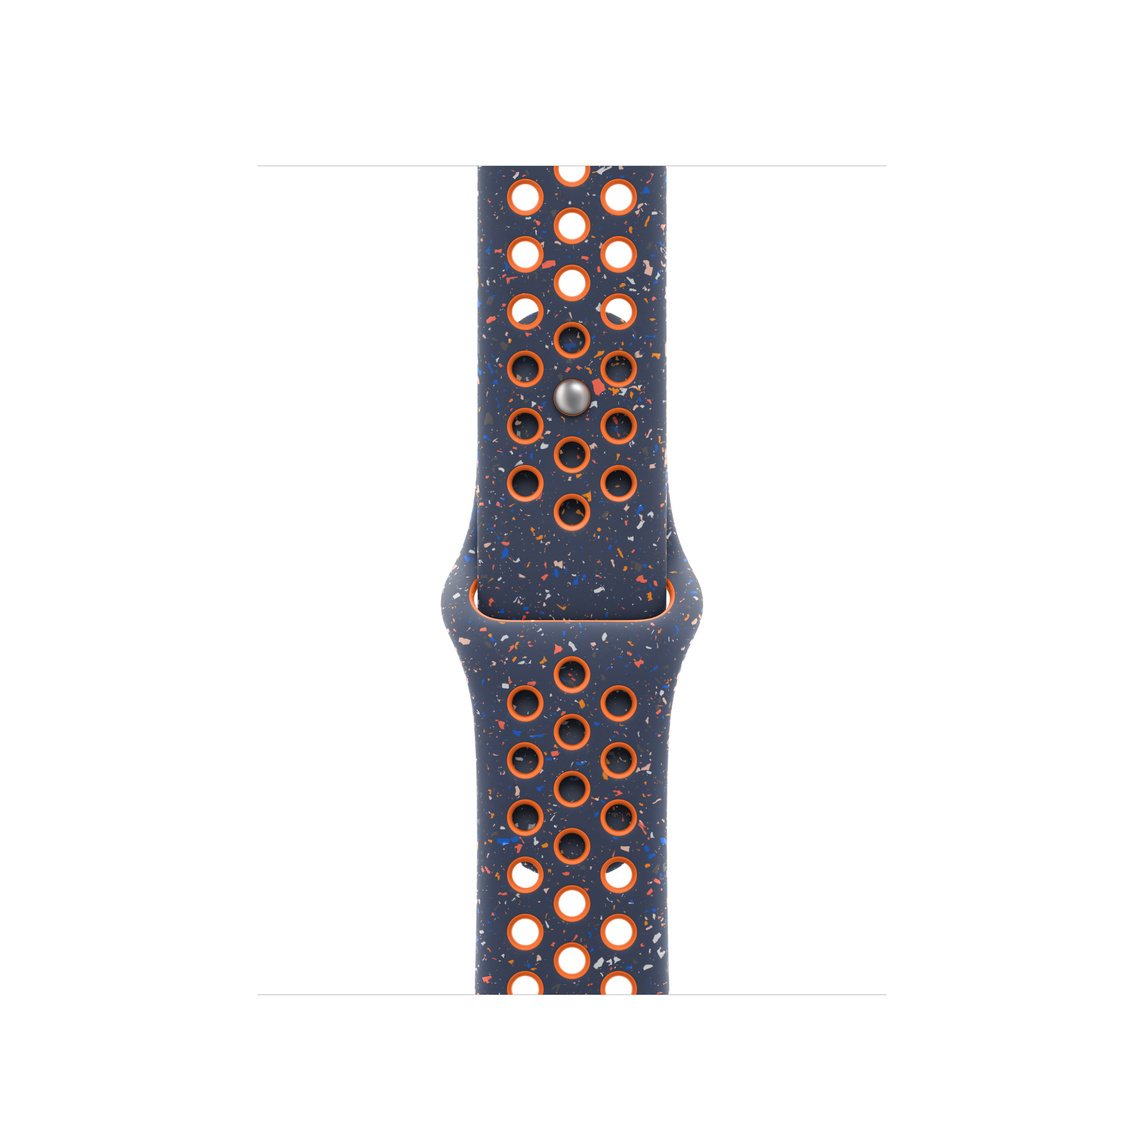 Blue Flame (dark blue) Nike Sport Band, smooth fluoroelastomer with perforations for breathability and pin-and-tuck closure